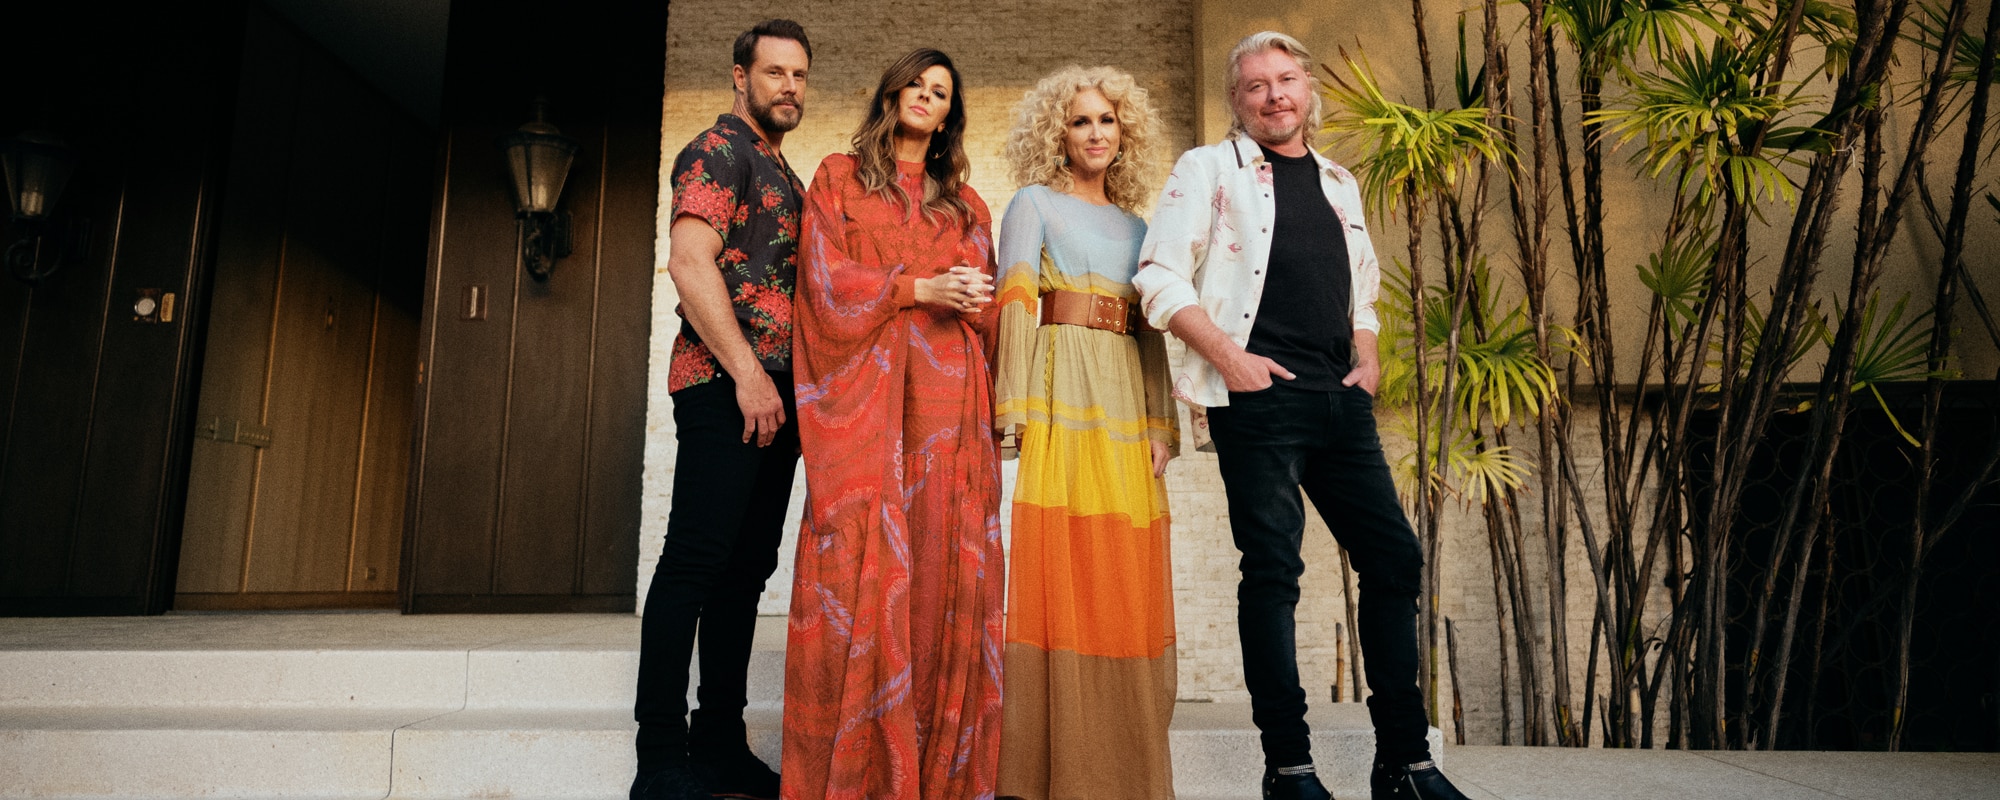 beer wine and whiskey little big town